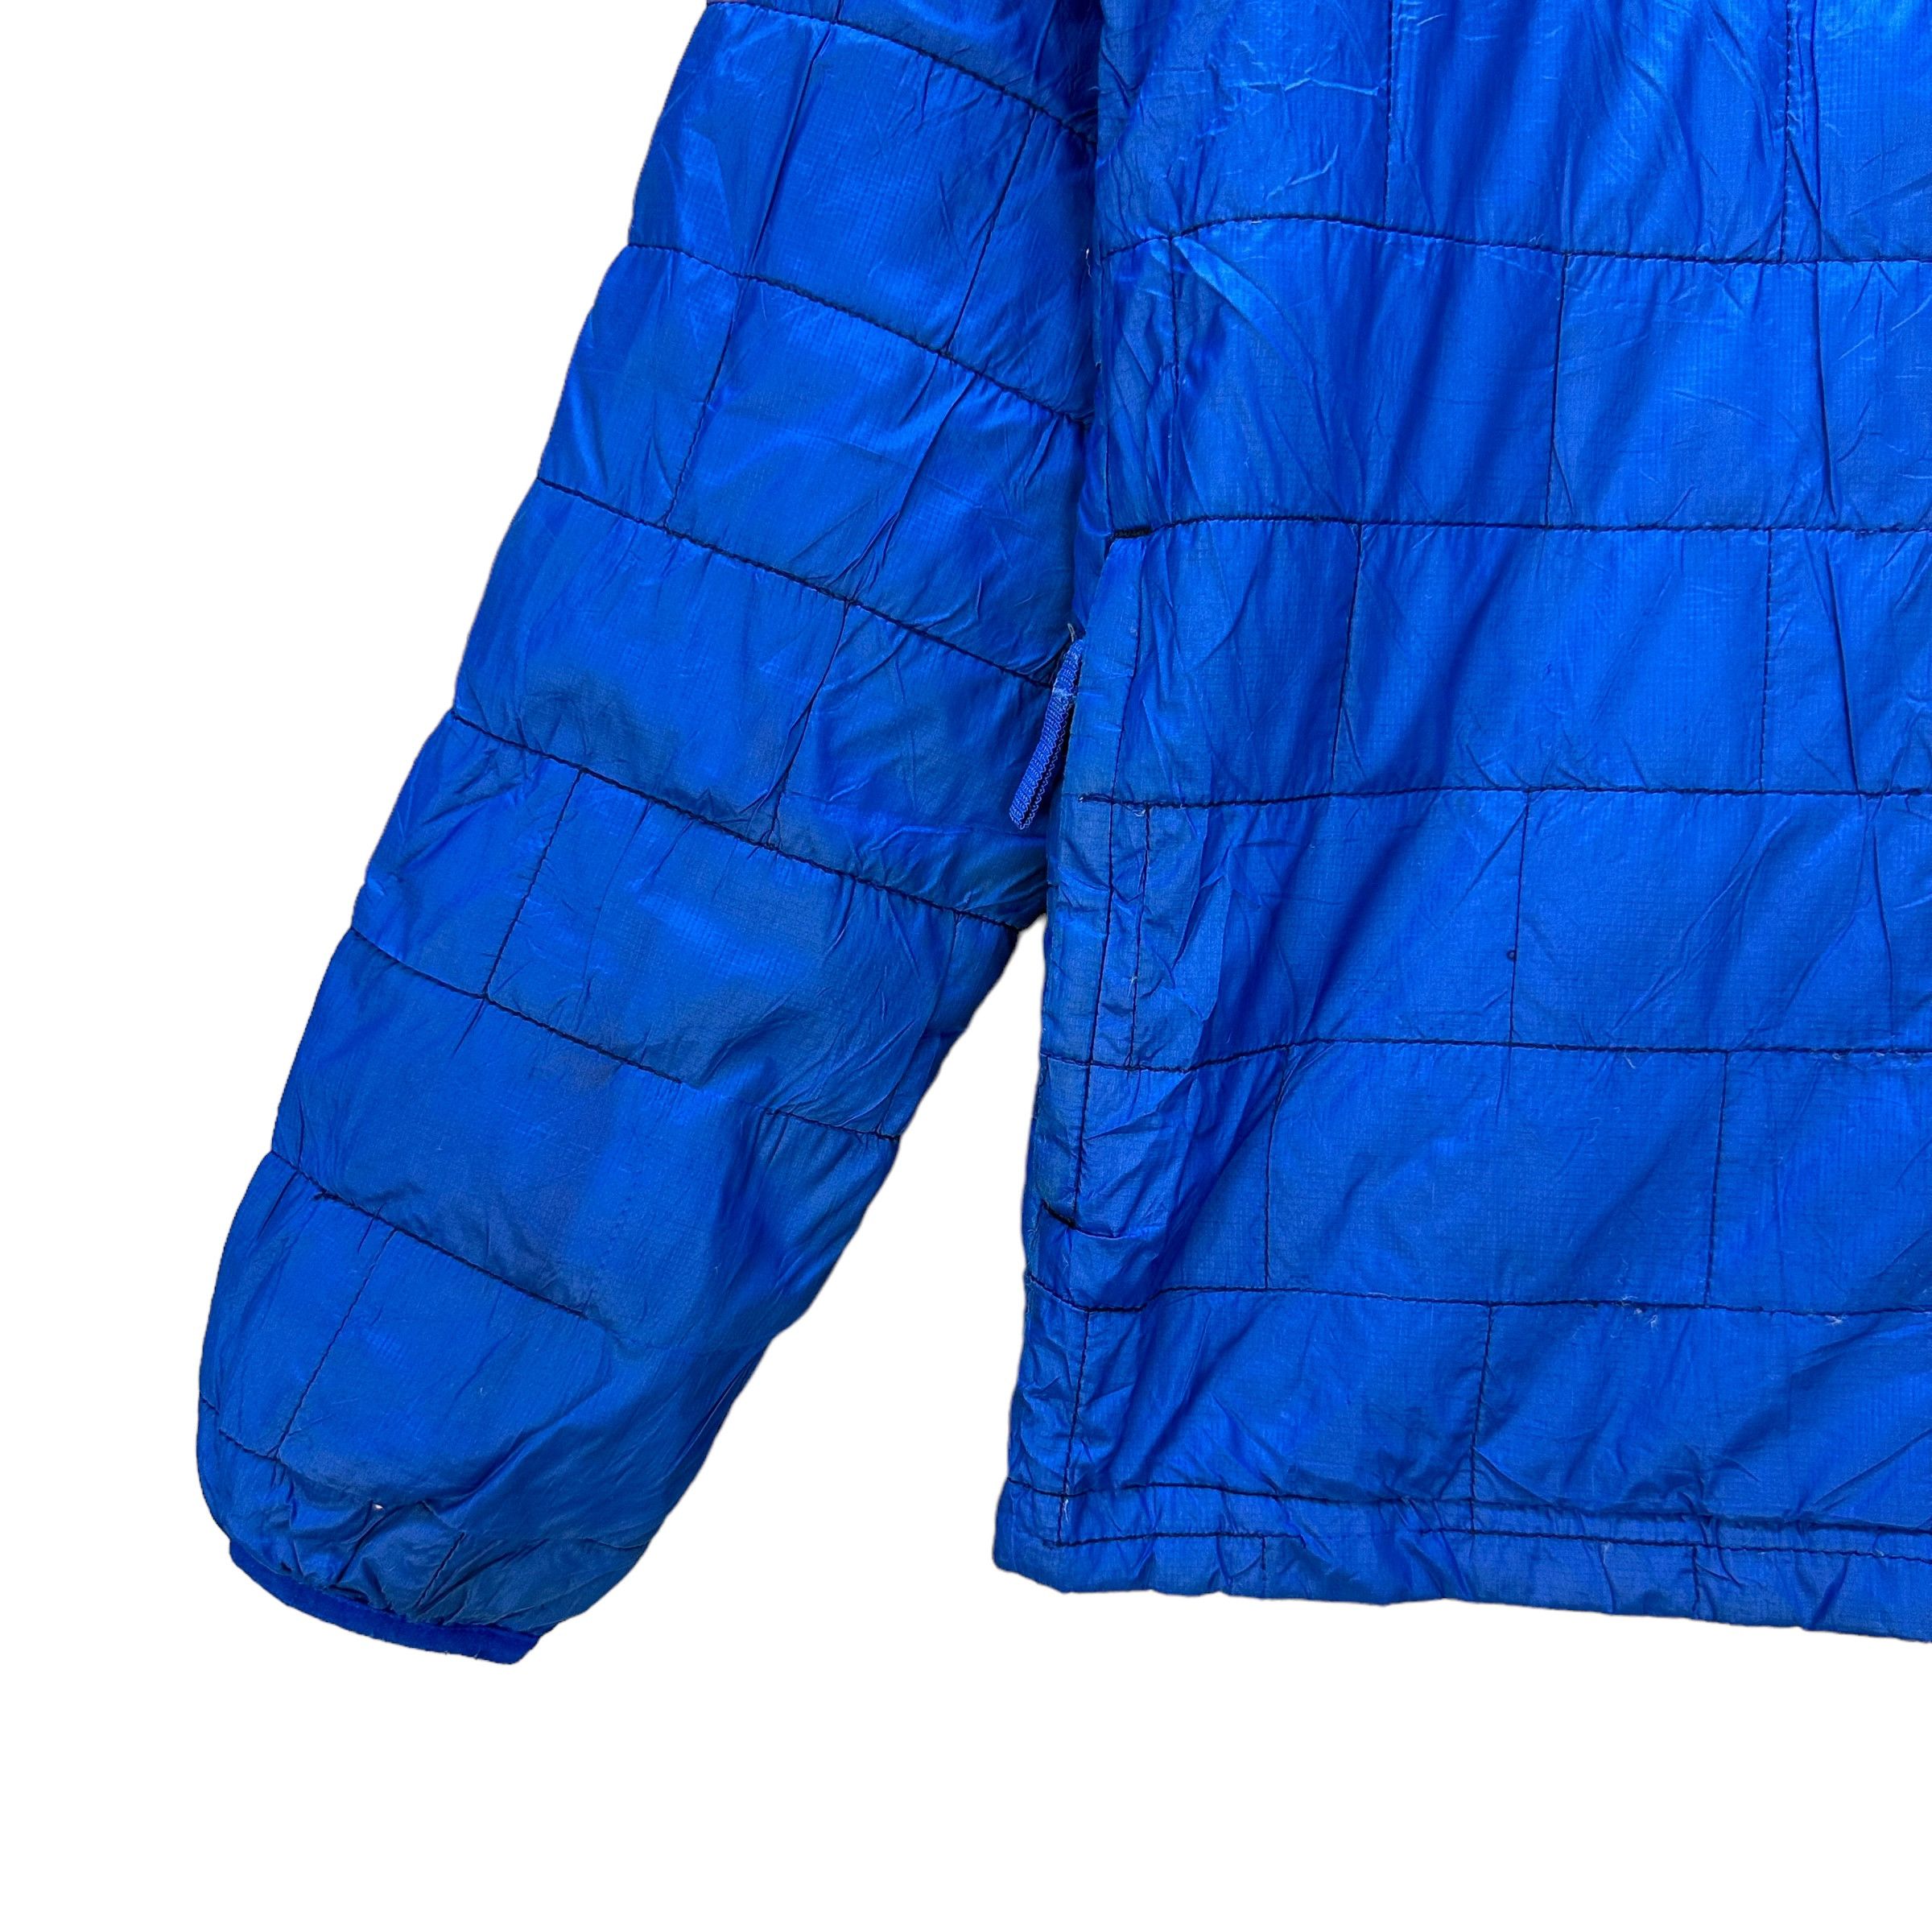 PATAGONIA LIGHT PUFFER JACKET IN BLUE FOR KIDS #9020-48 - 7